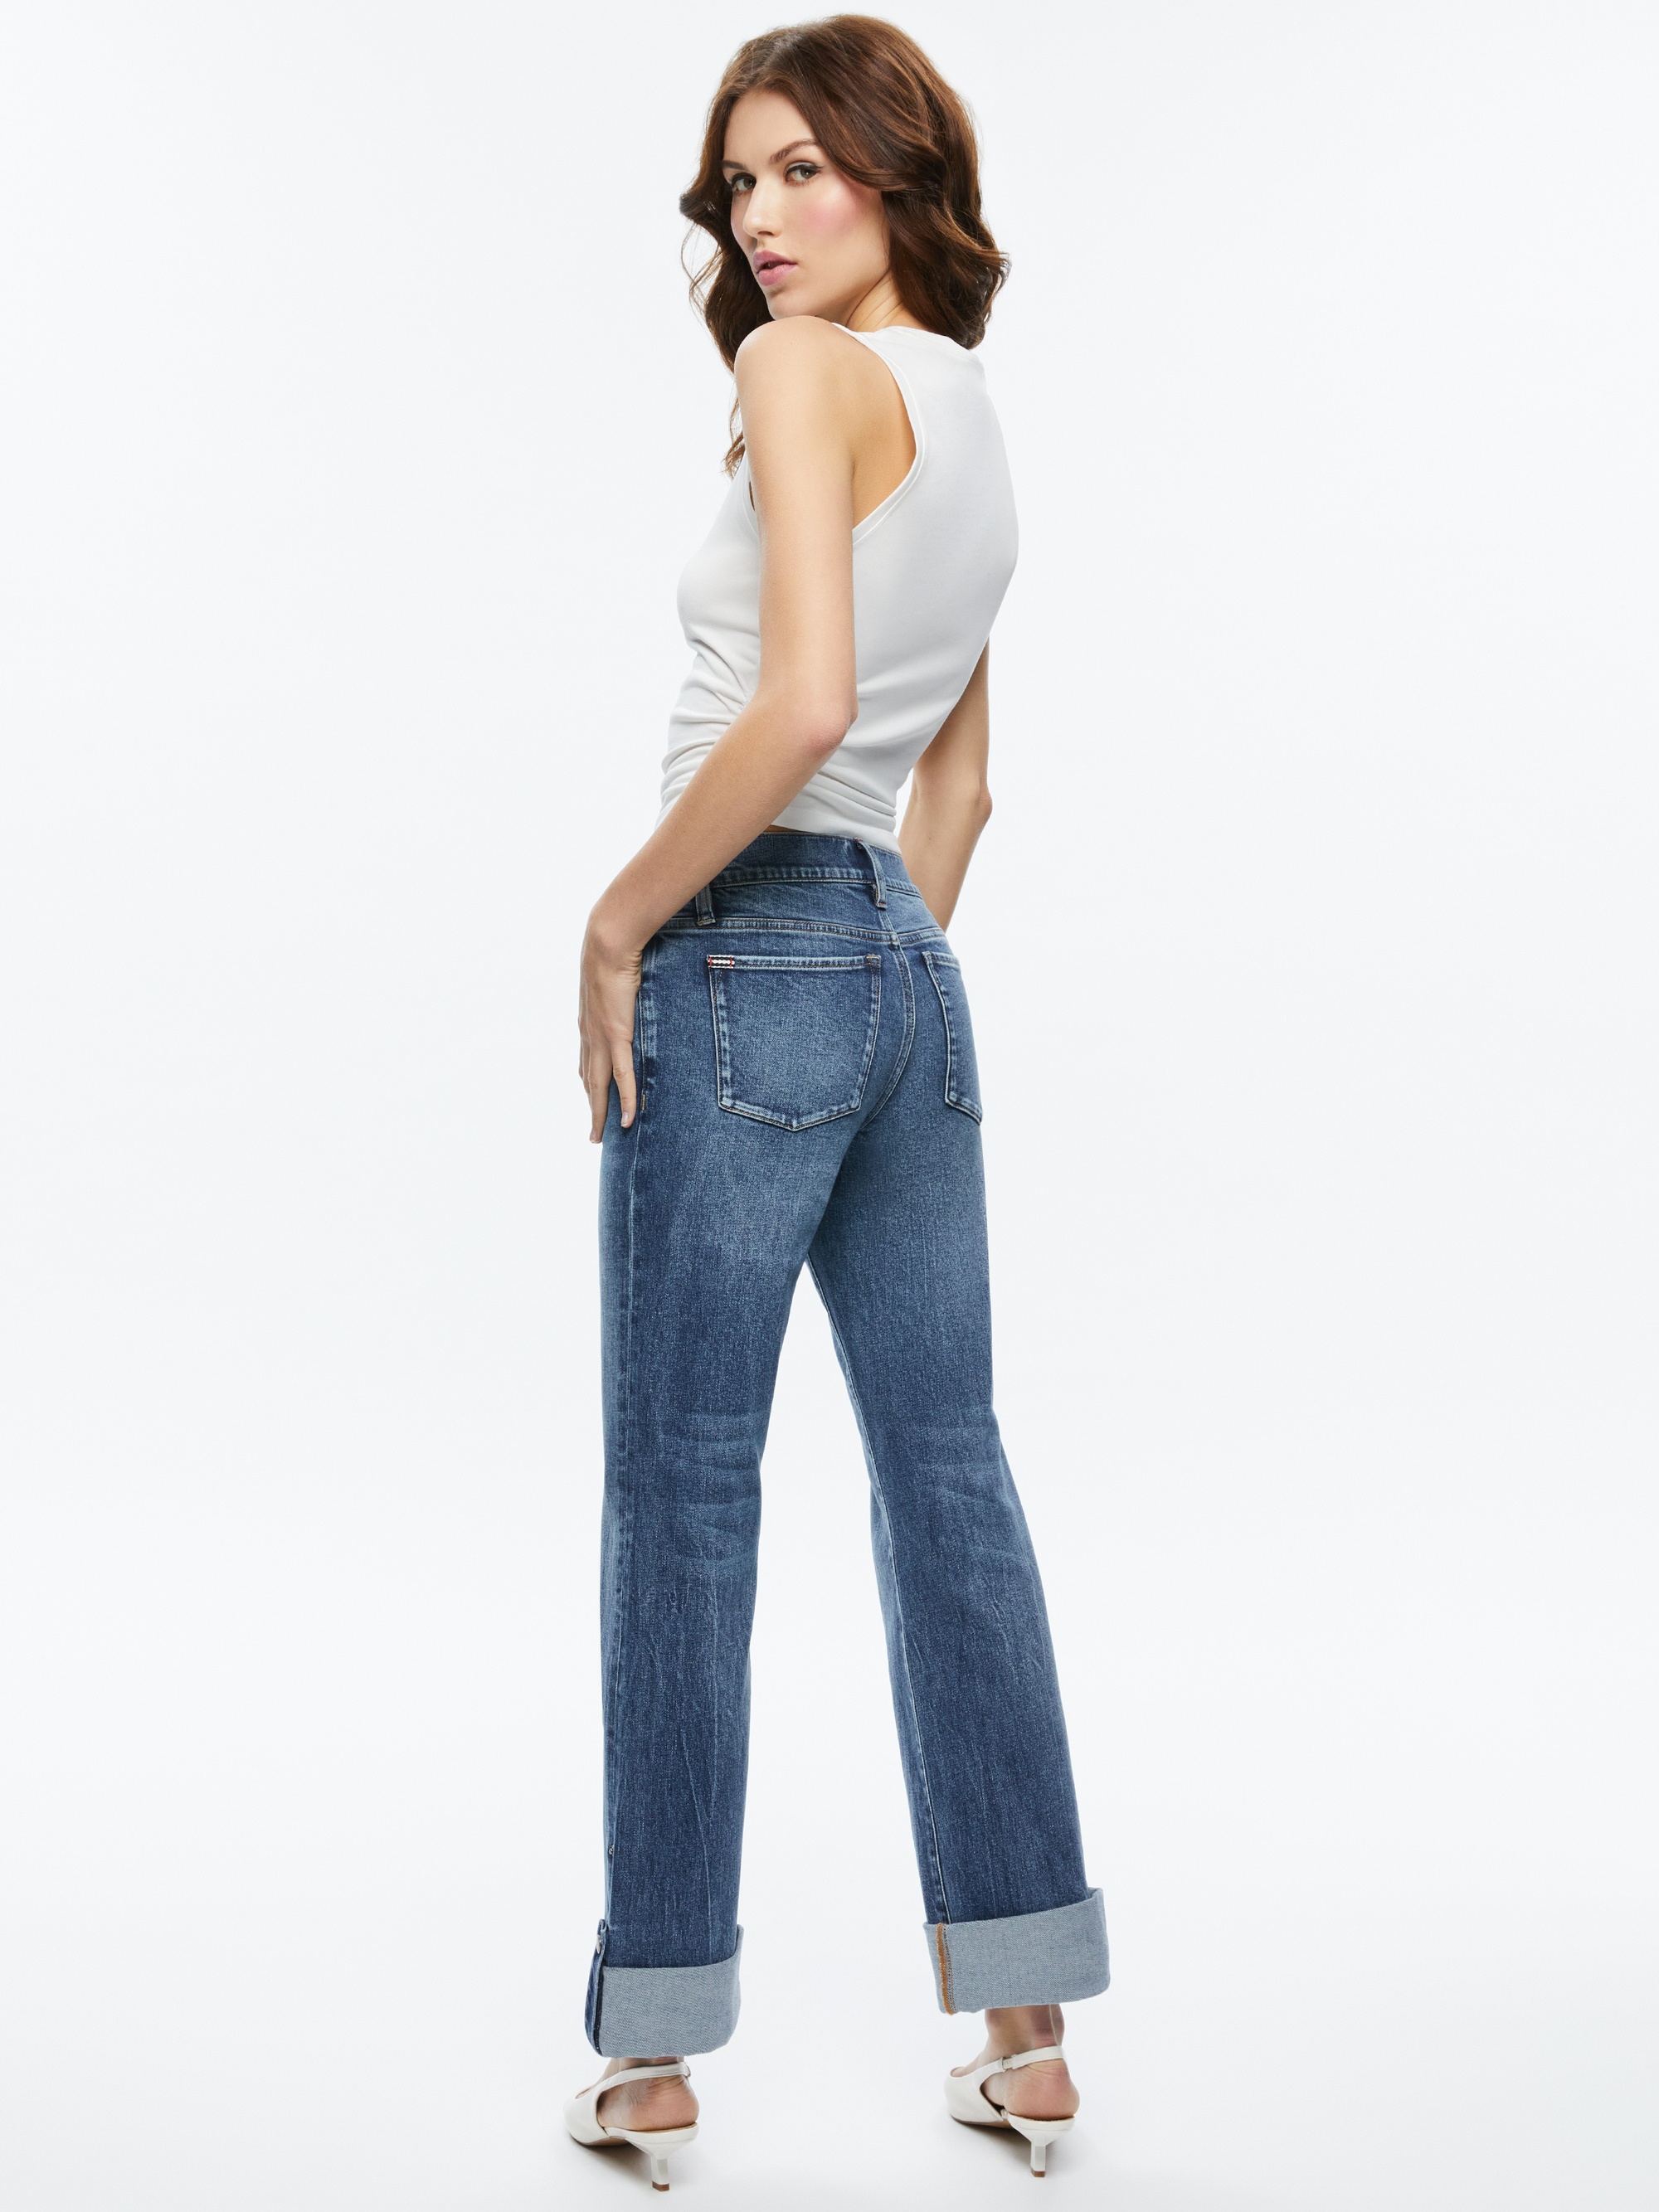 ABILENE LOW RISE CUFFED JEAN WITH SNAPS - 4